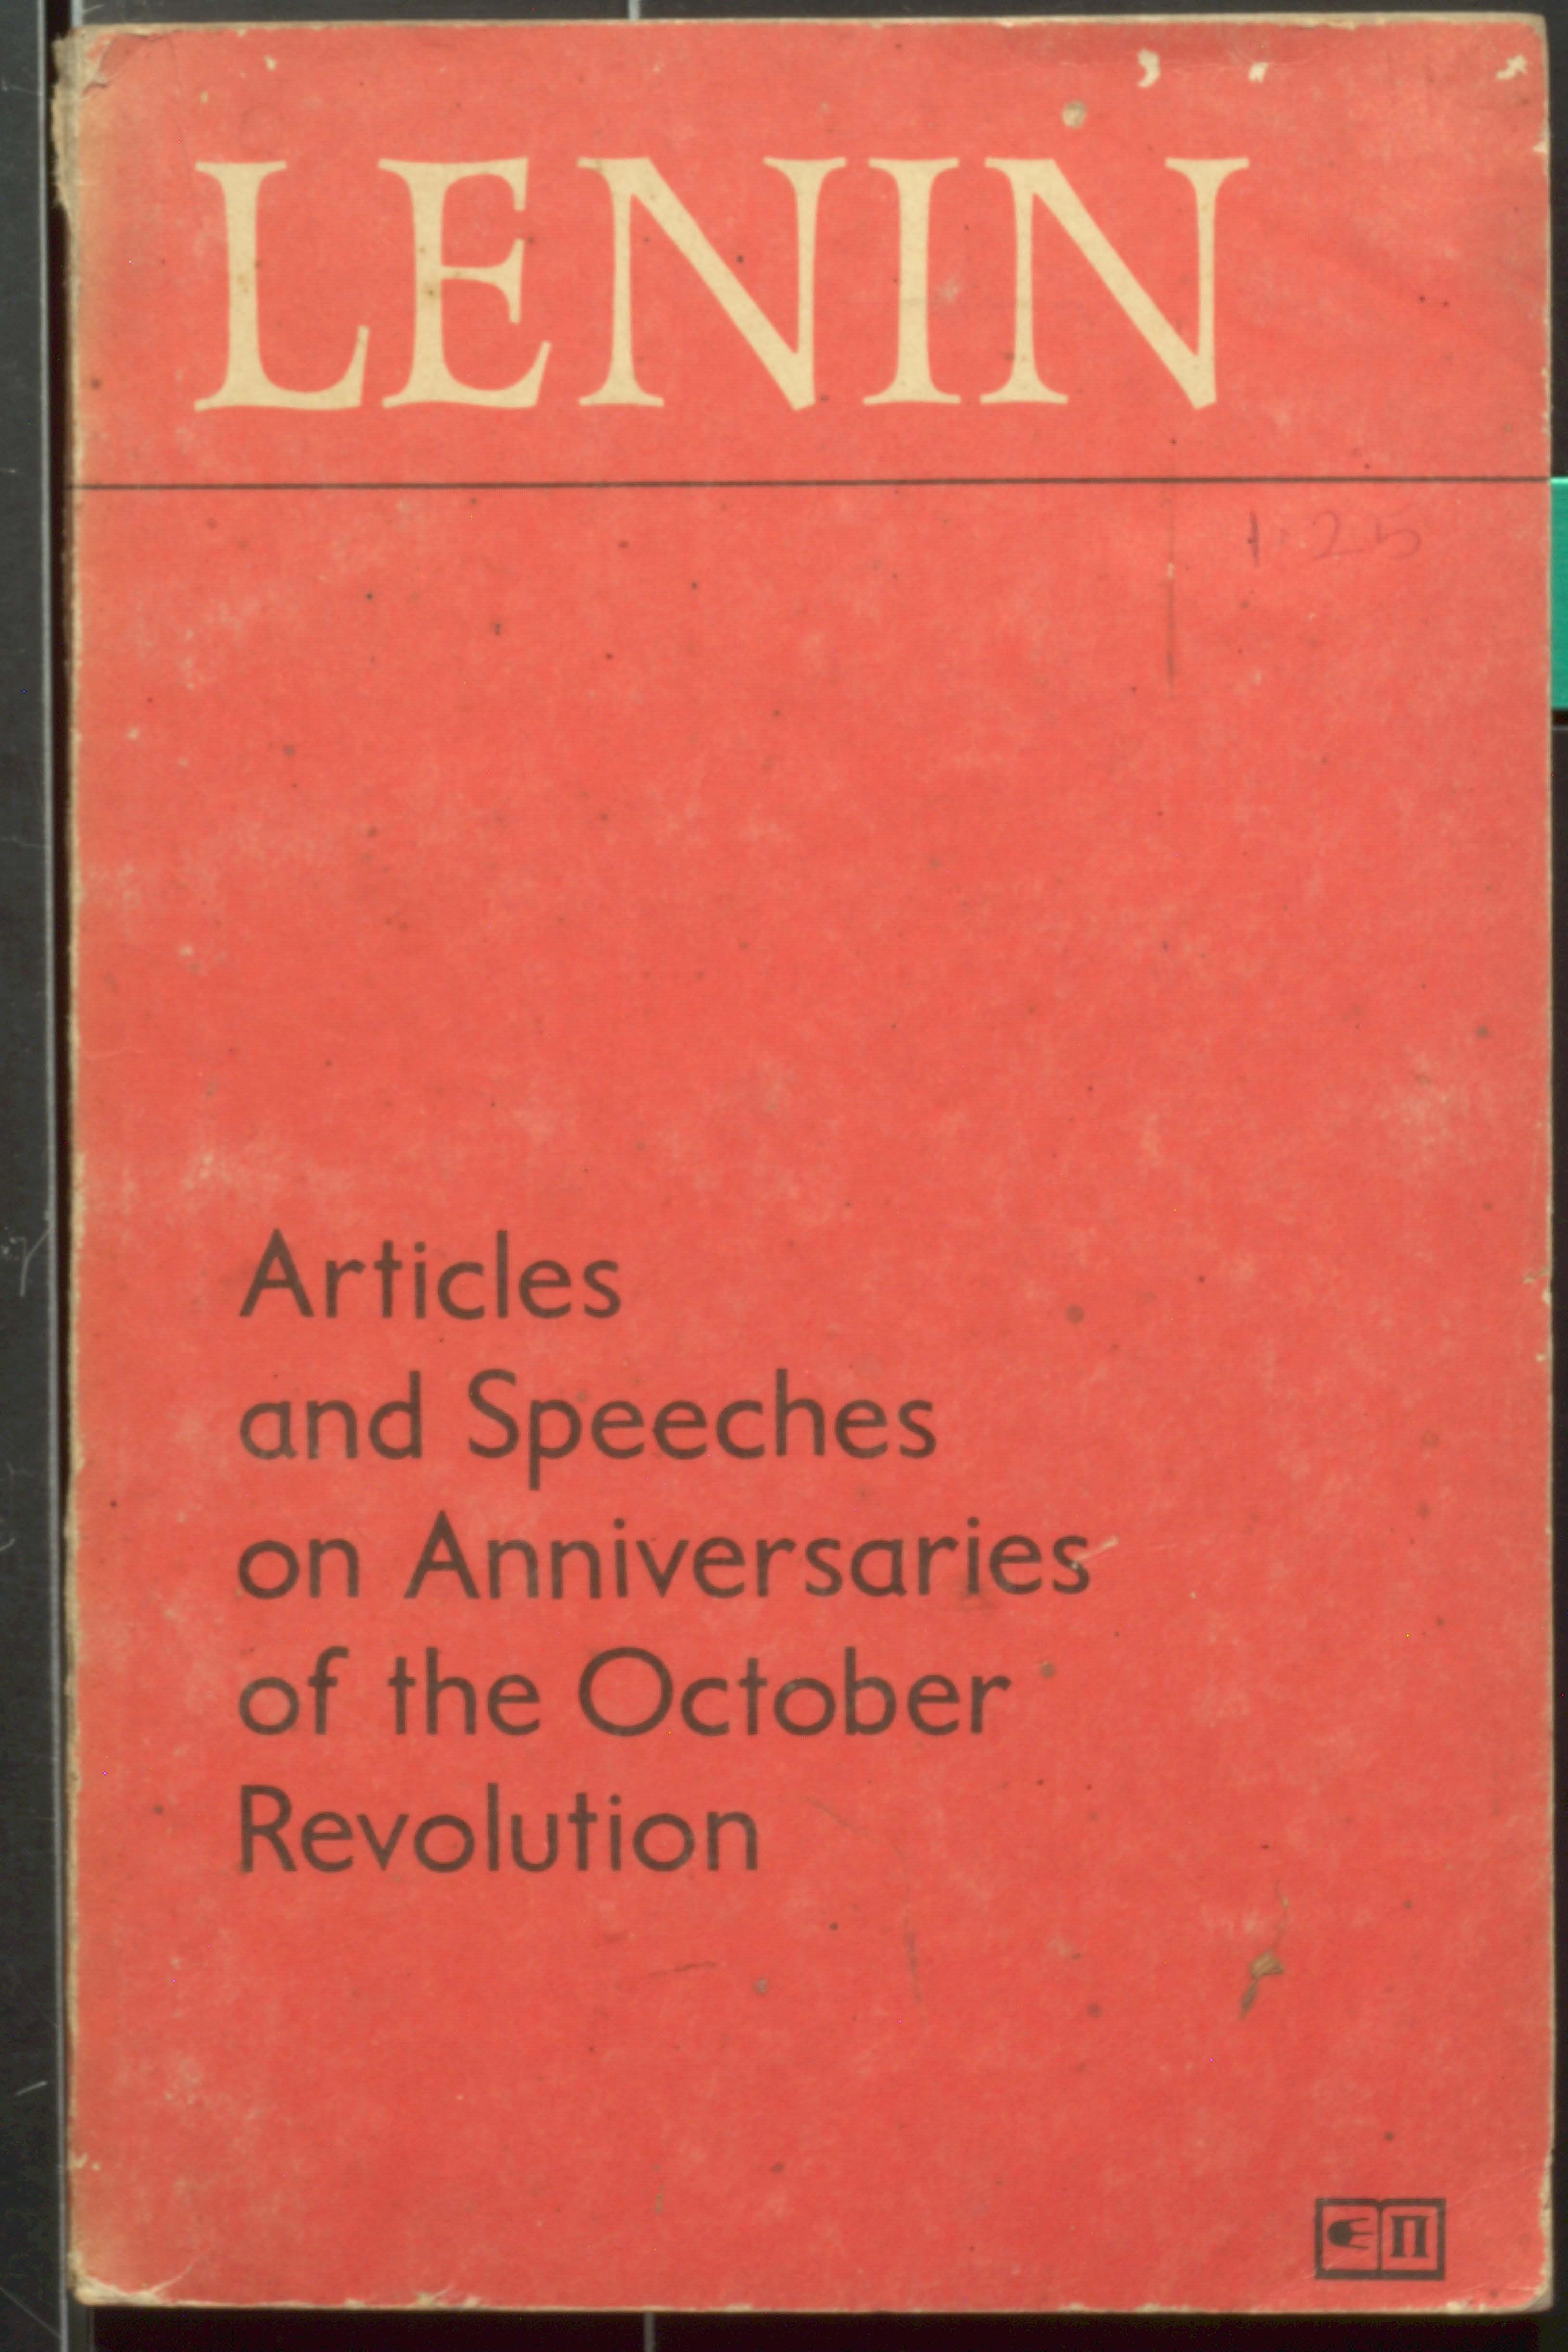 Lenin articles and speeches on anniversaries of the october revolution